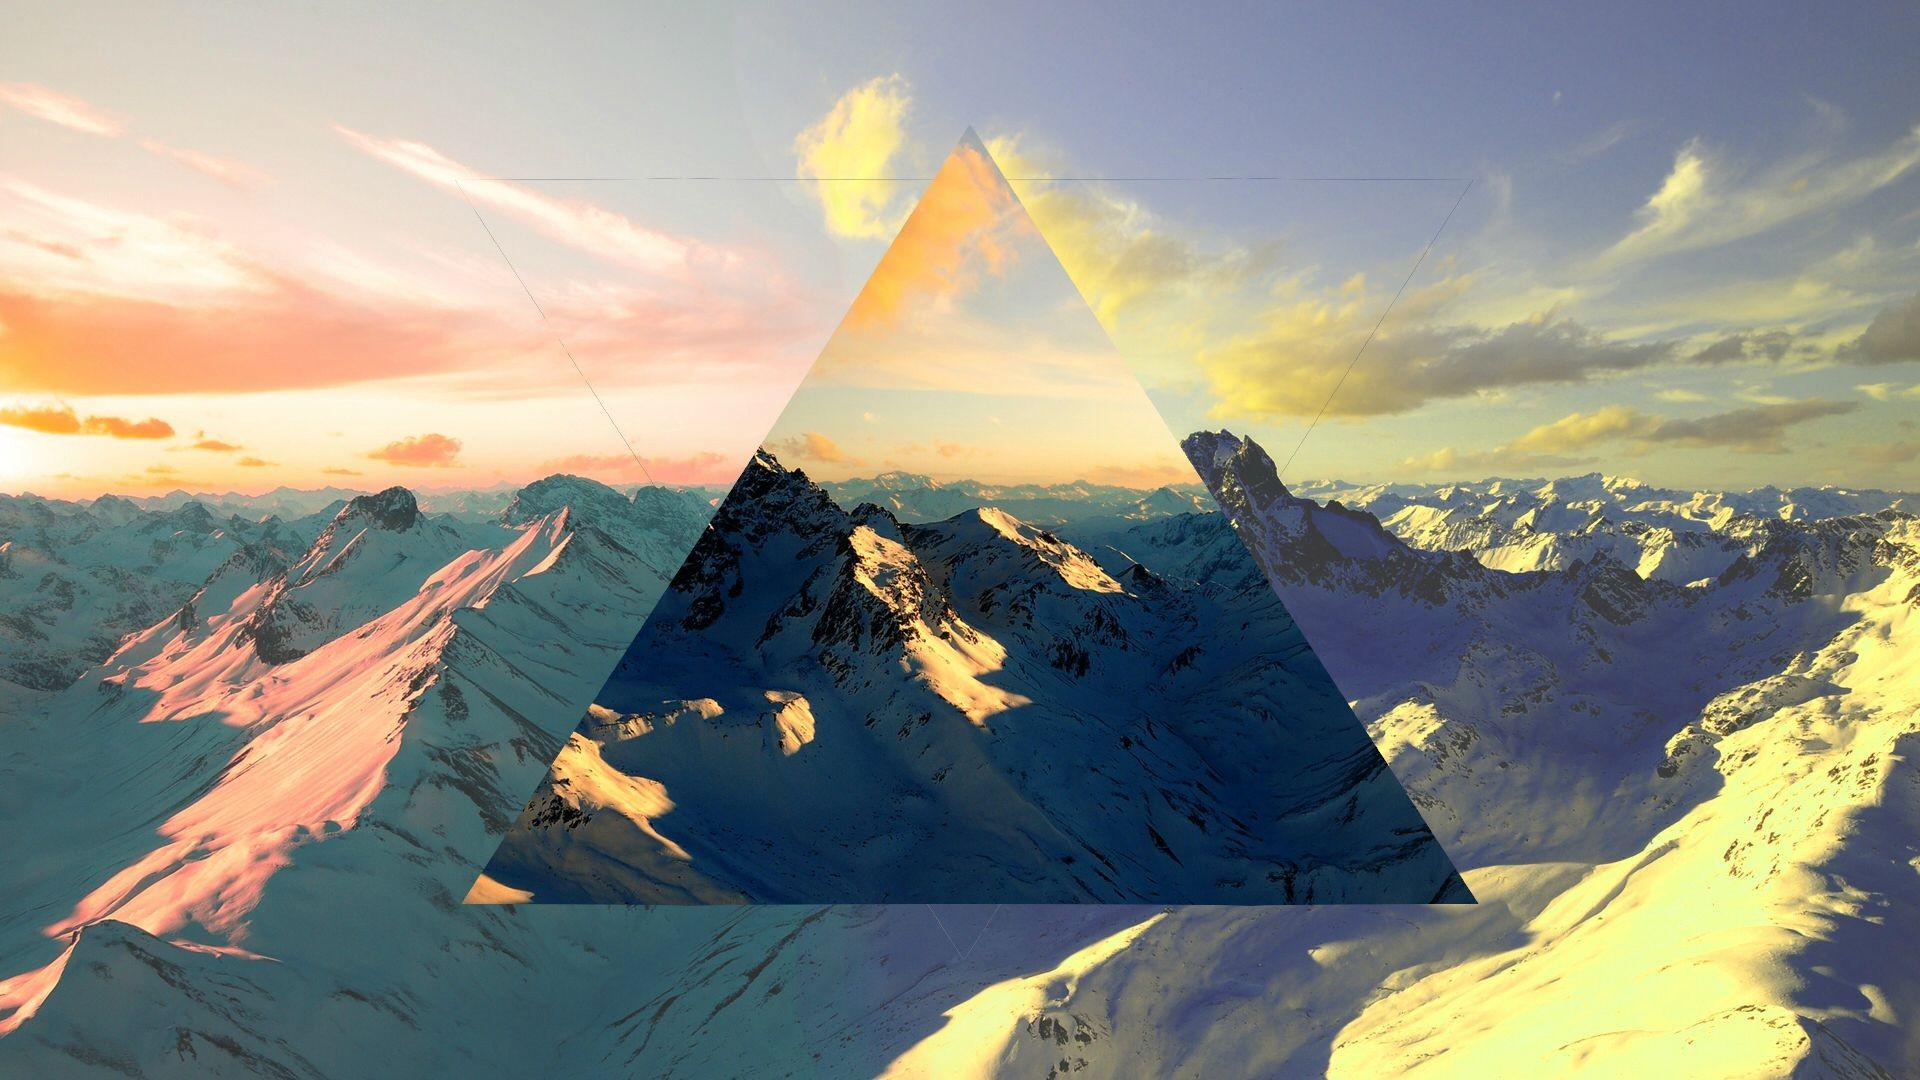 #polyscape, #mountains, #nature, #abstract, wallpaper